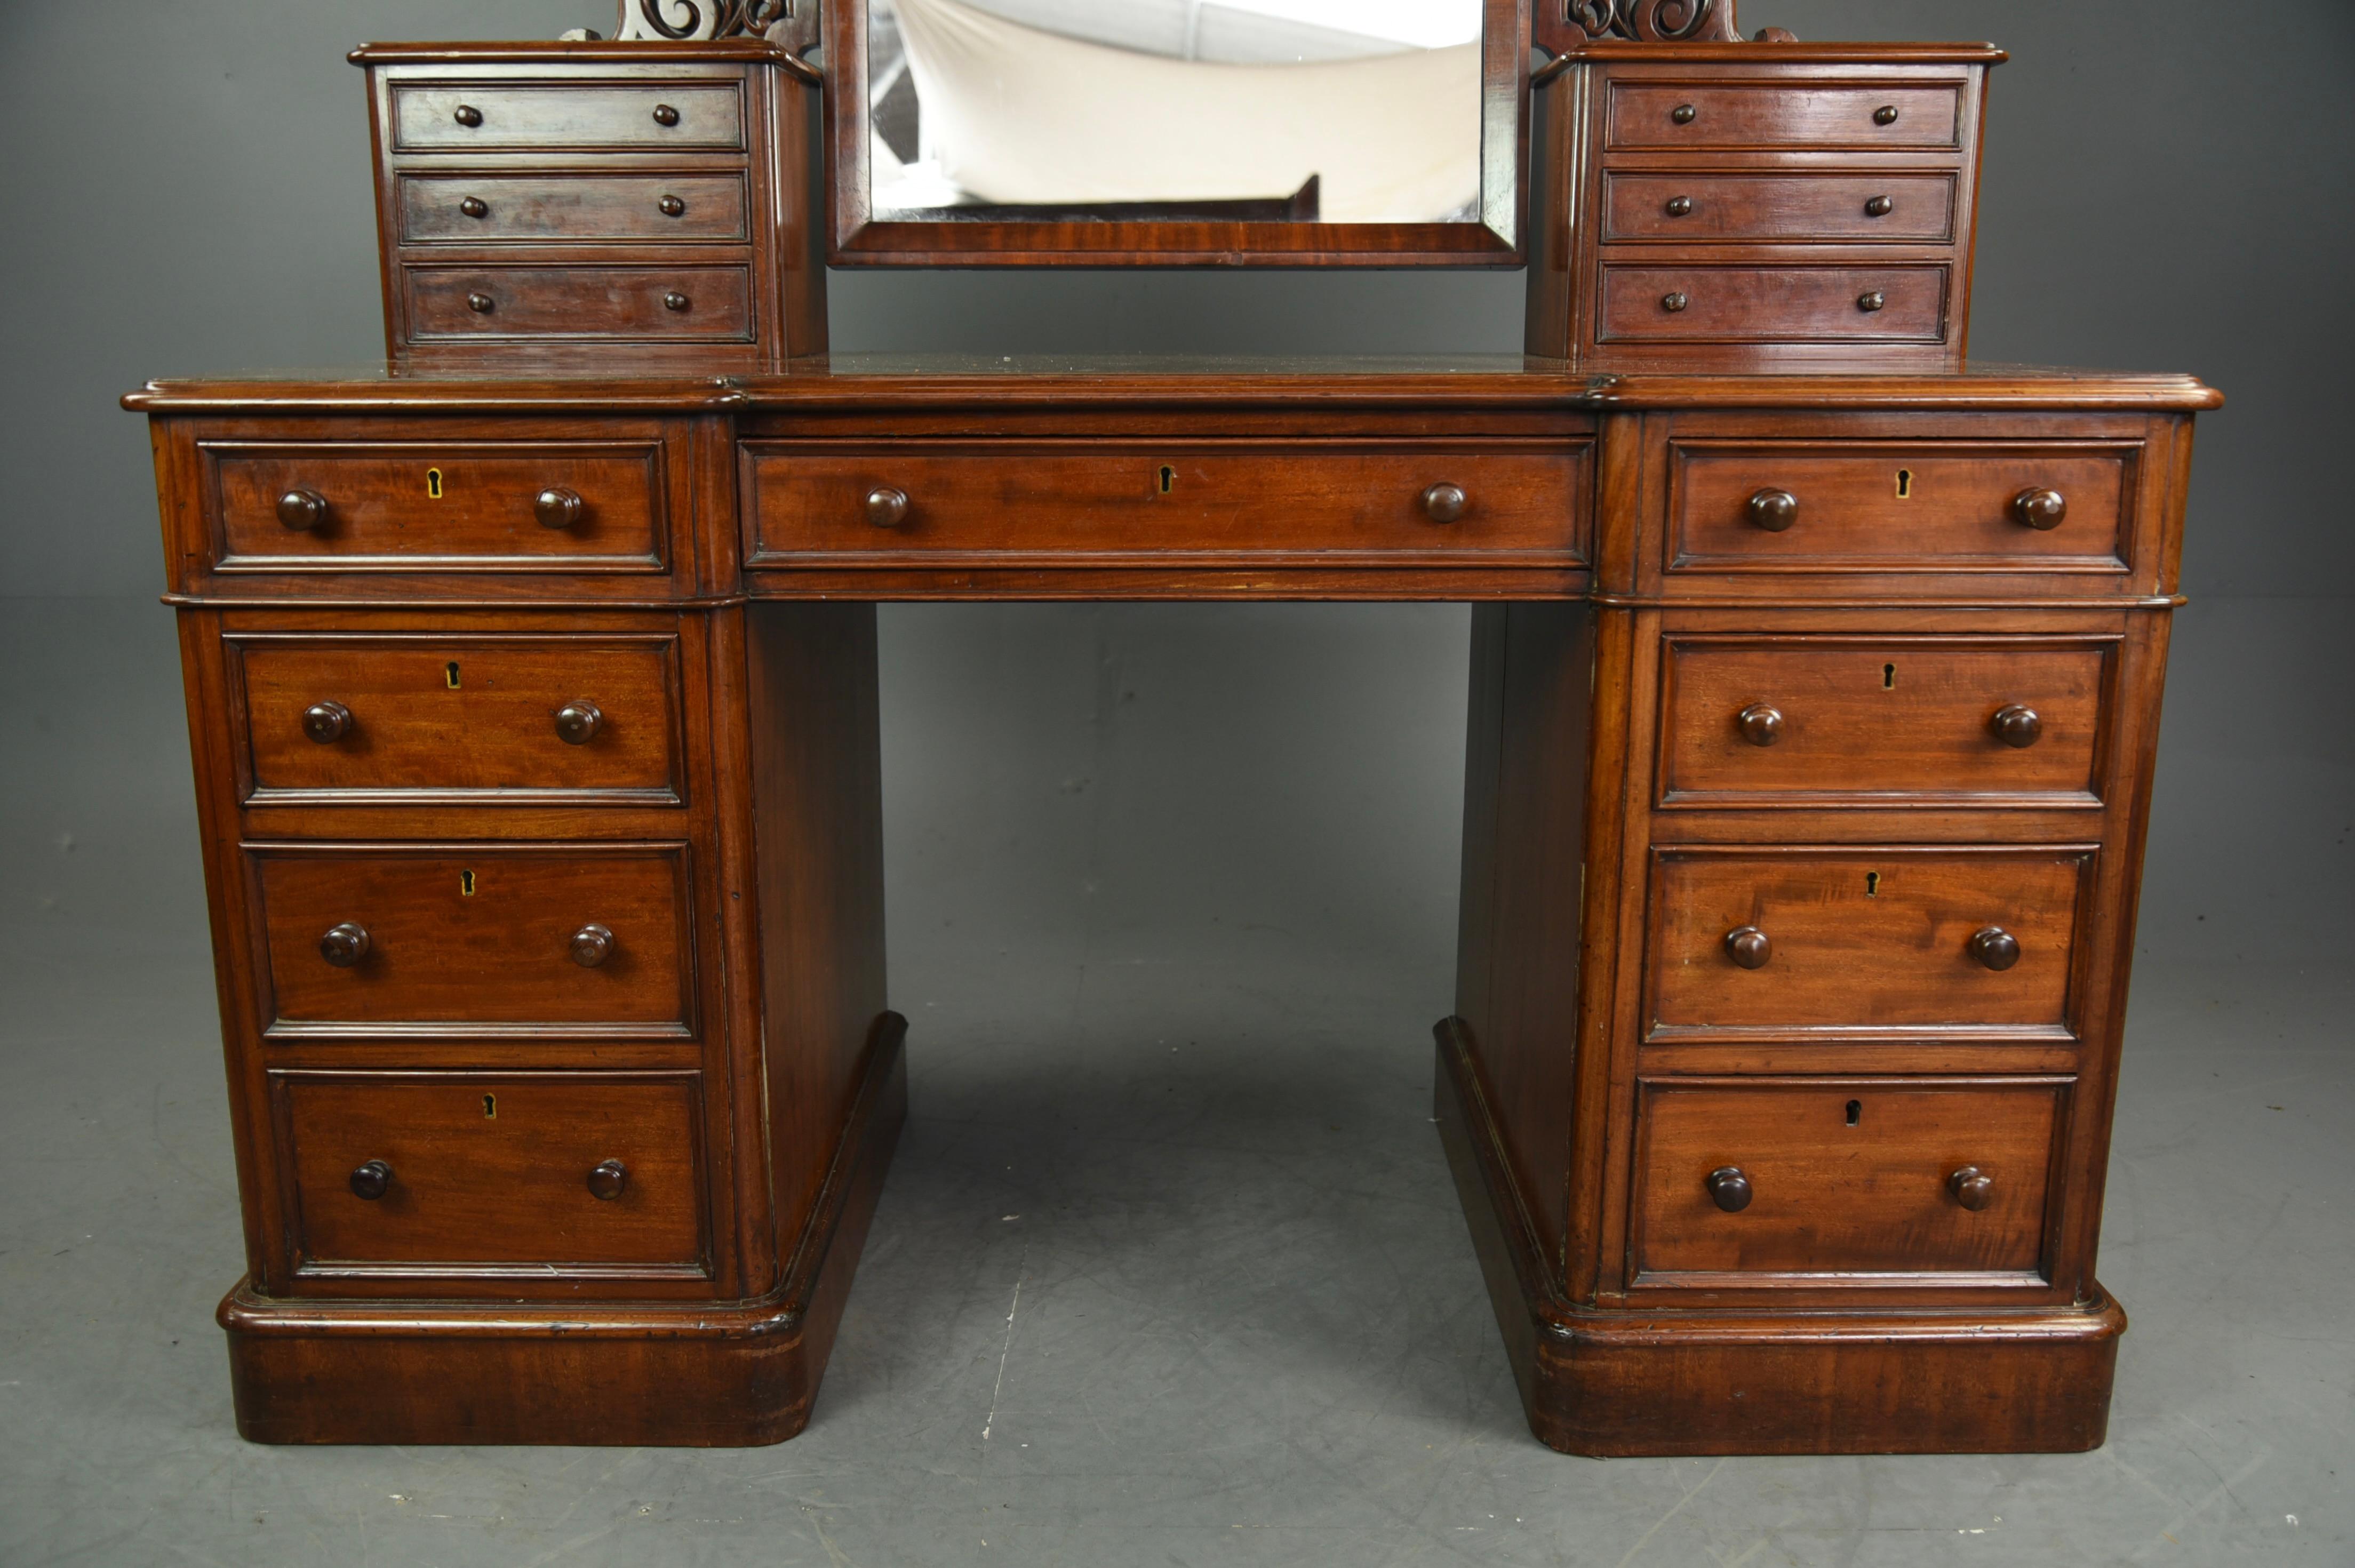 Fine quality Victorian mahogany pedestal dressing table.
The dressing table is in wonderful original condition with 9 drawers to the bottom and 6 trinket drawers to the top.
The swivel mirror is in good clean condition with no fogging giving good